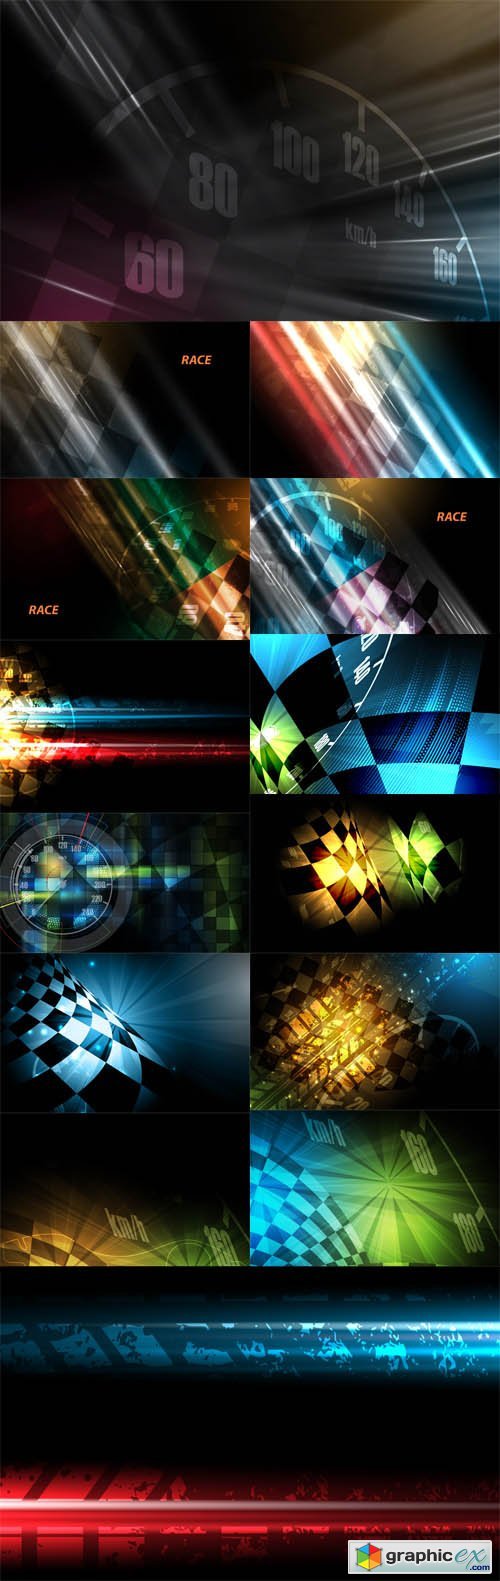 Racing Square Backgrounds